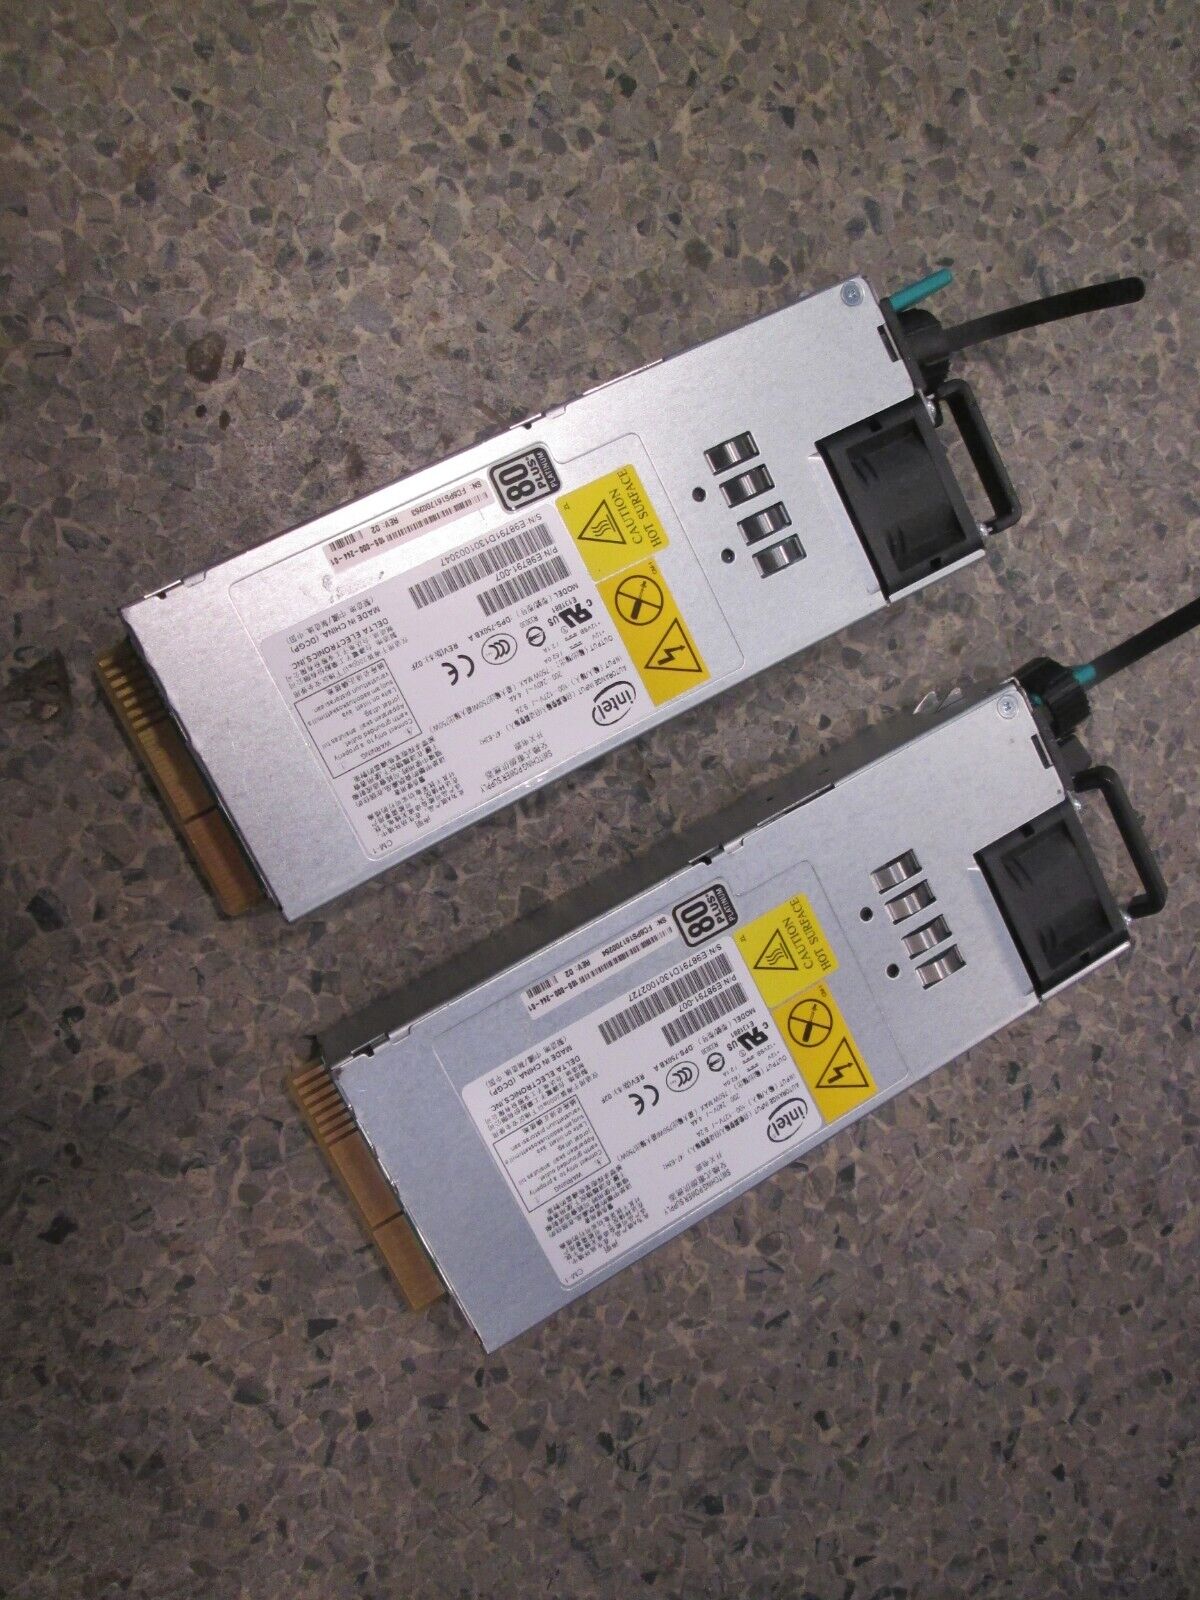 LOT of 2 Intel Dps-750xb a 750w Switching Power Supply E98791-010 101272